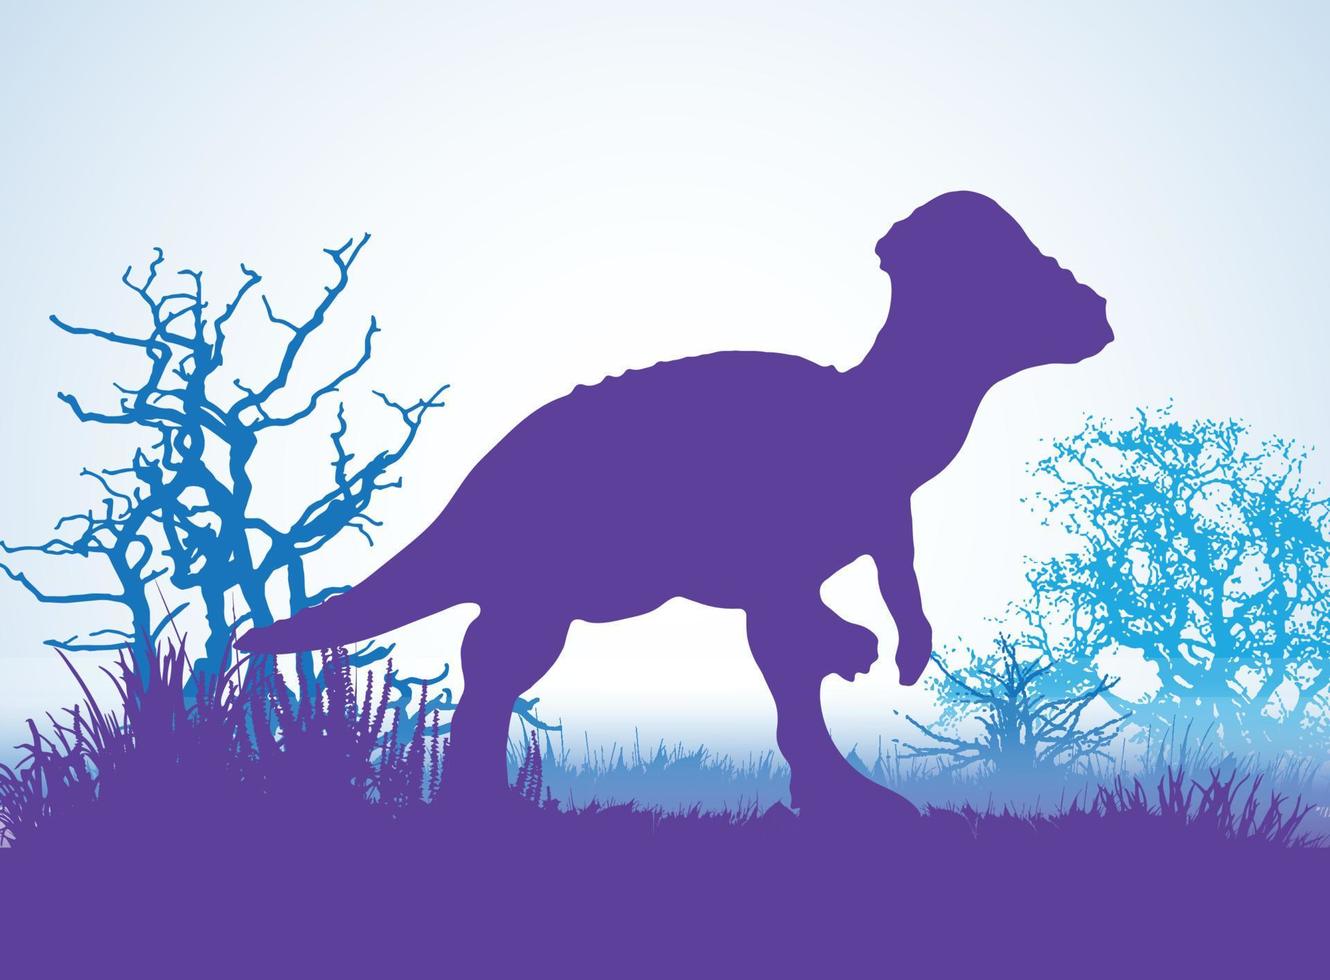 Pachycephalosaurus Dinosaurs silhouettes in prehistoric environment overlapping layers decorative background banner abstract vector illustration